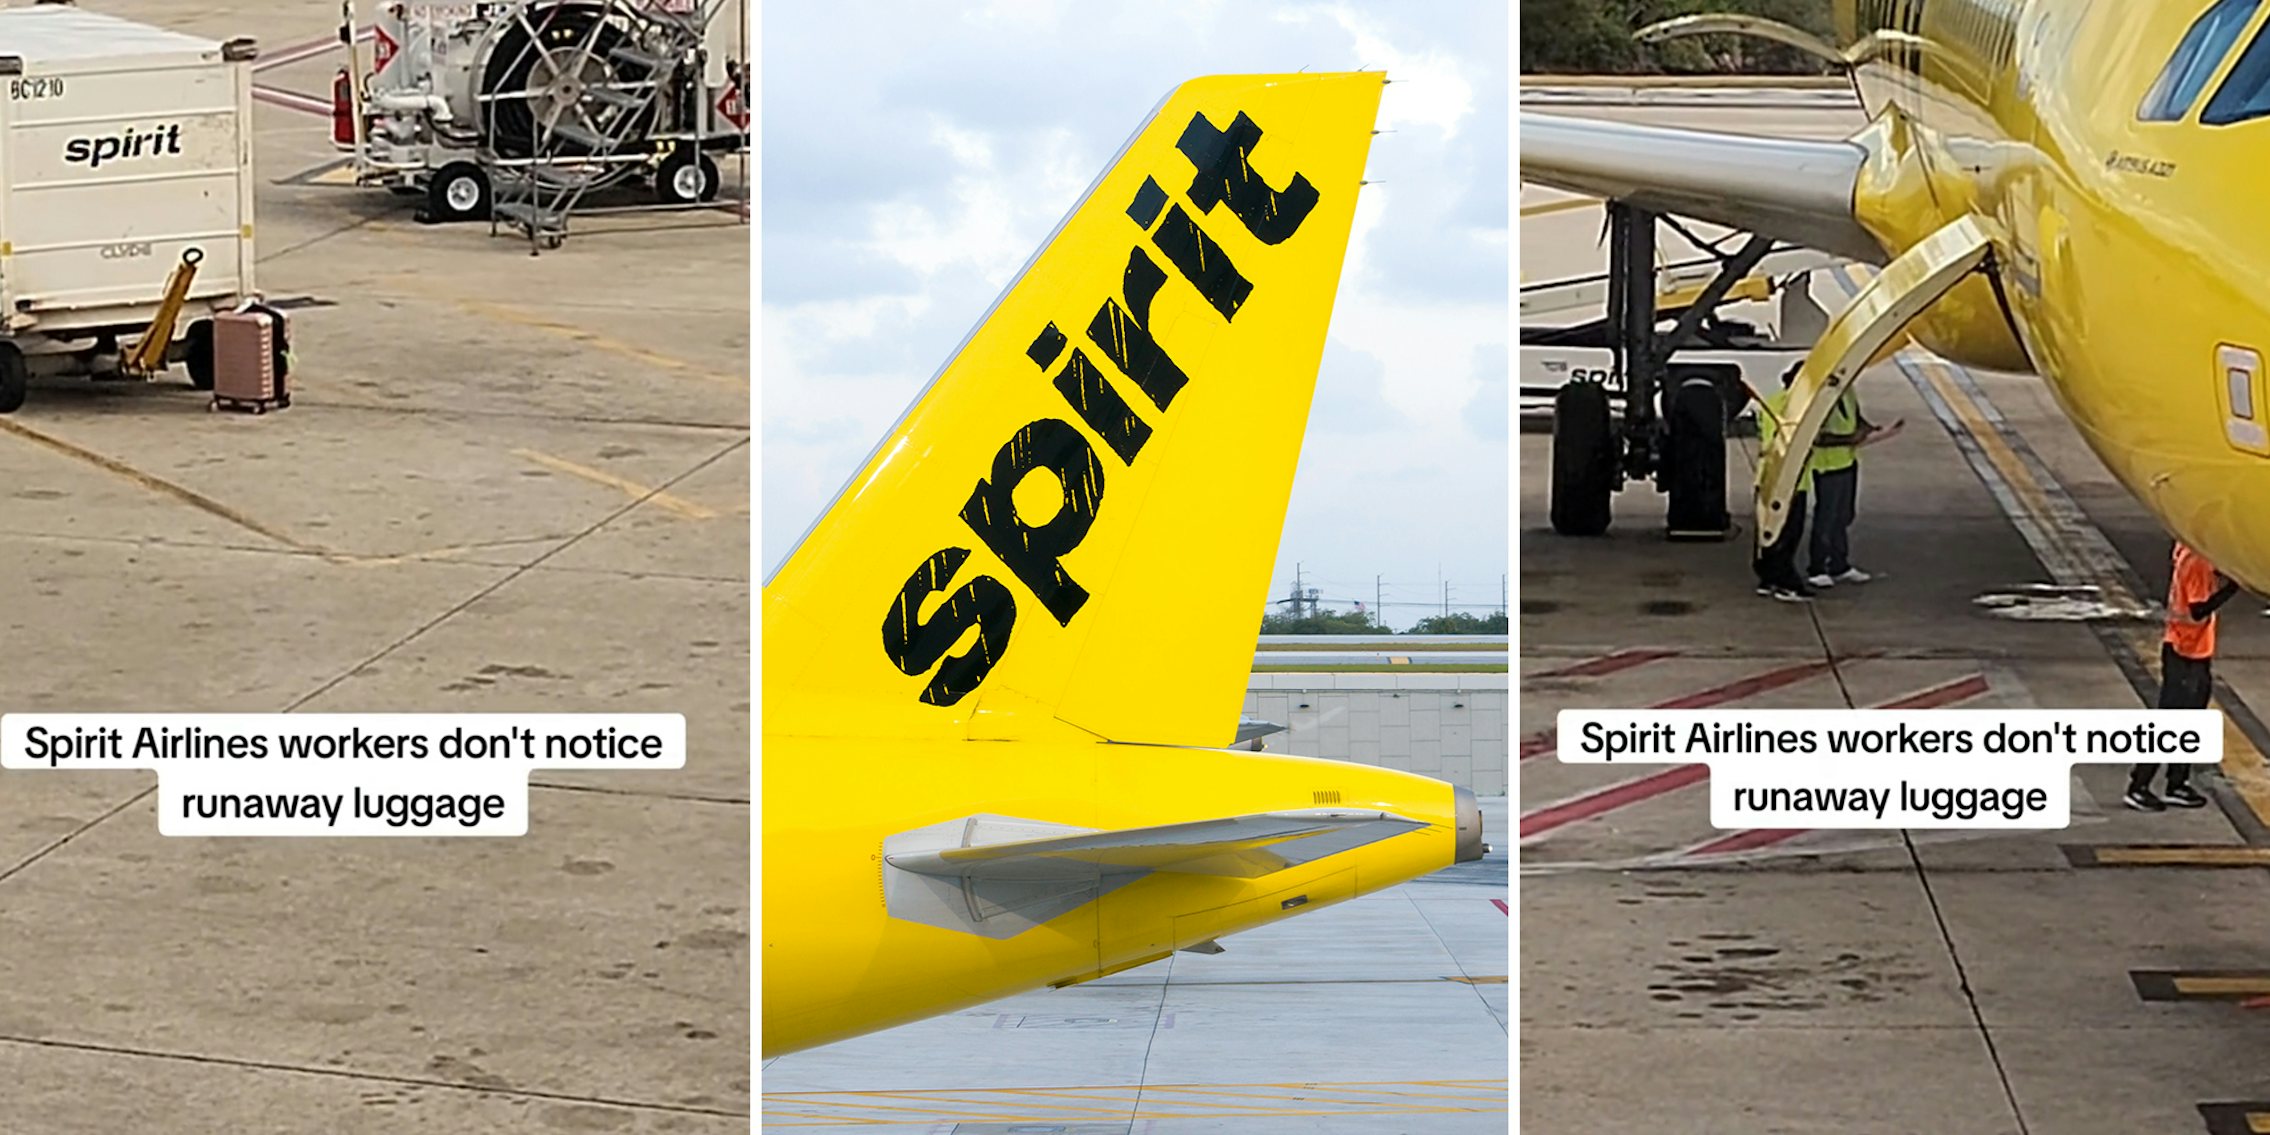 Travelers catch Spirit Airlines leaving someone’s luggage behind